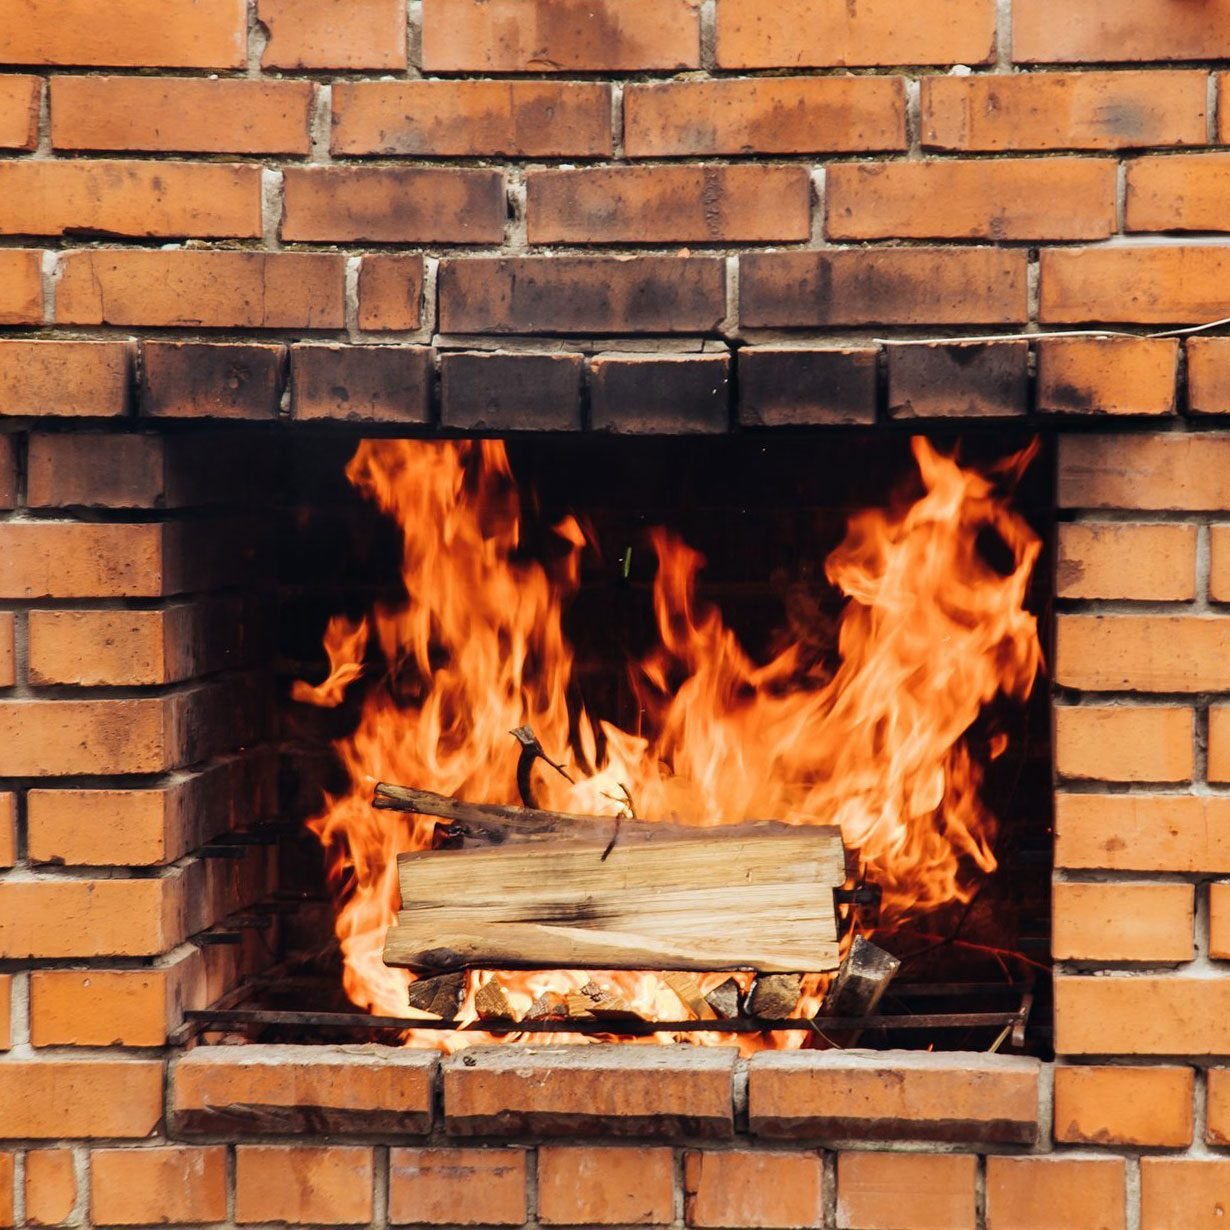 How To Clean a Brick Fireplace